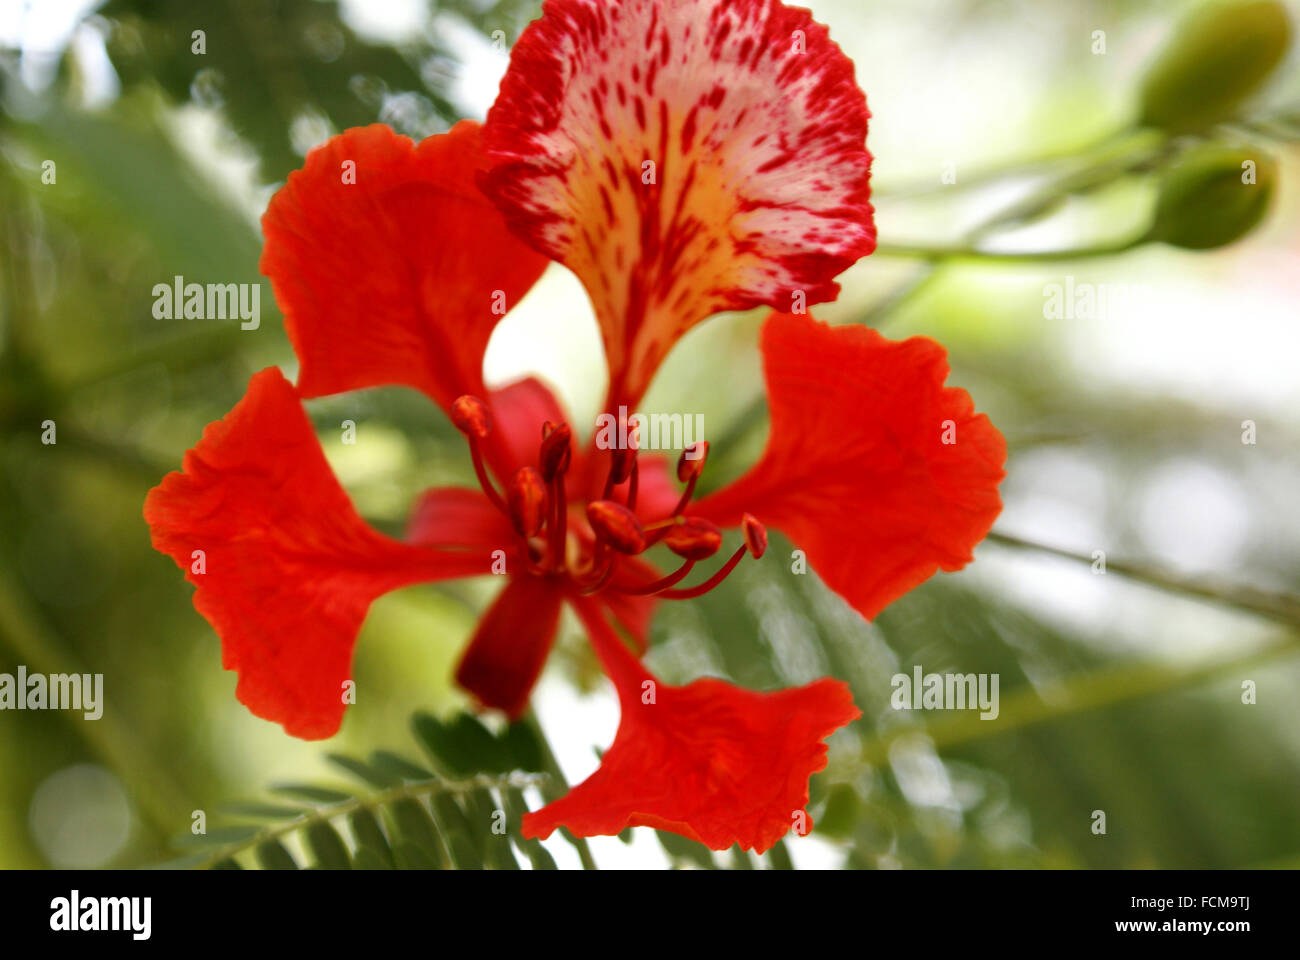 Delonix regia, Gulmohar, Royal Poinciana, deciduous ornamental tree with fern like leaves and red spotted flowers, avenue tree Stock Photo